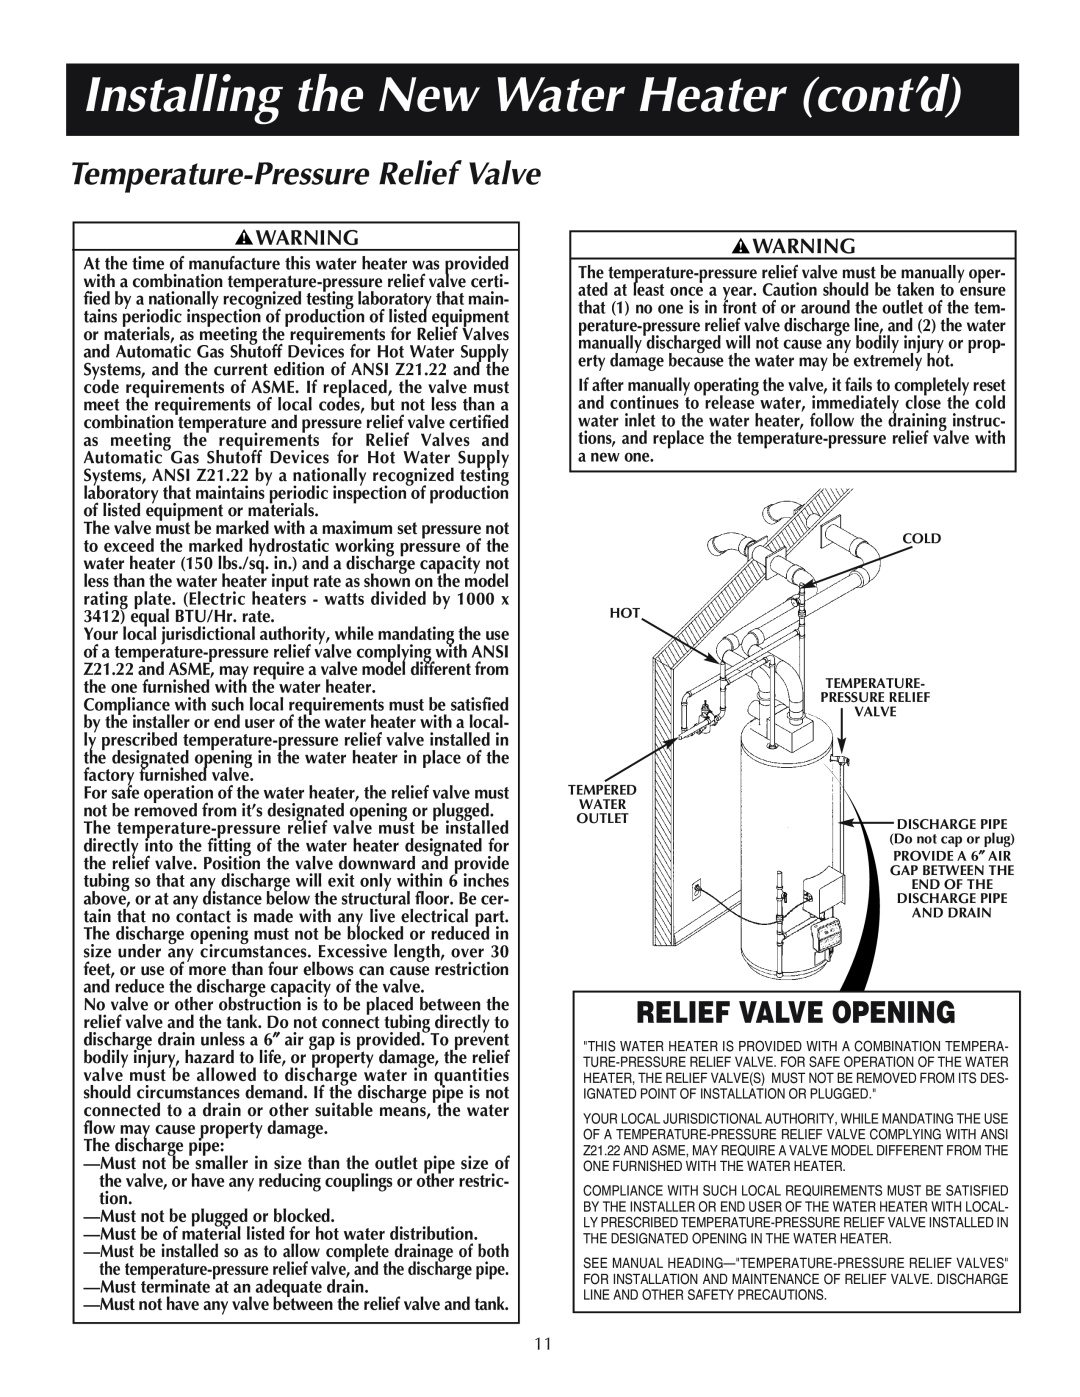 Reliance Water Heaters 184333-001, 606, 11-03 instruction manual Installing the New Water Heater cont’d, Relief Valve Opening 